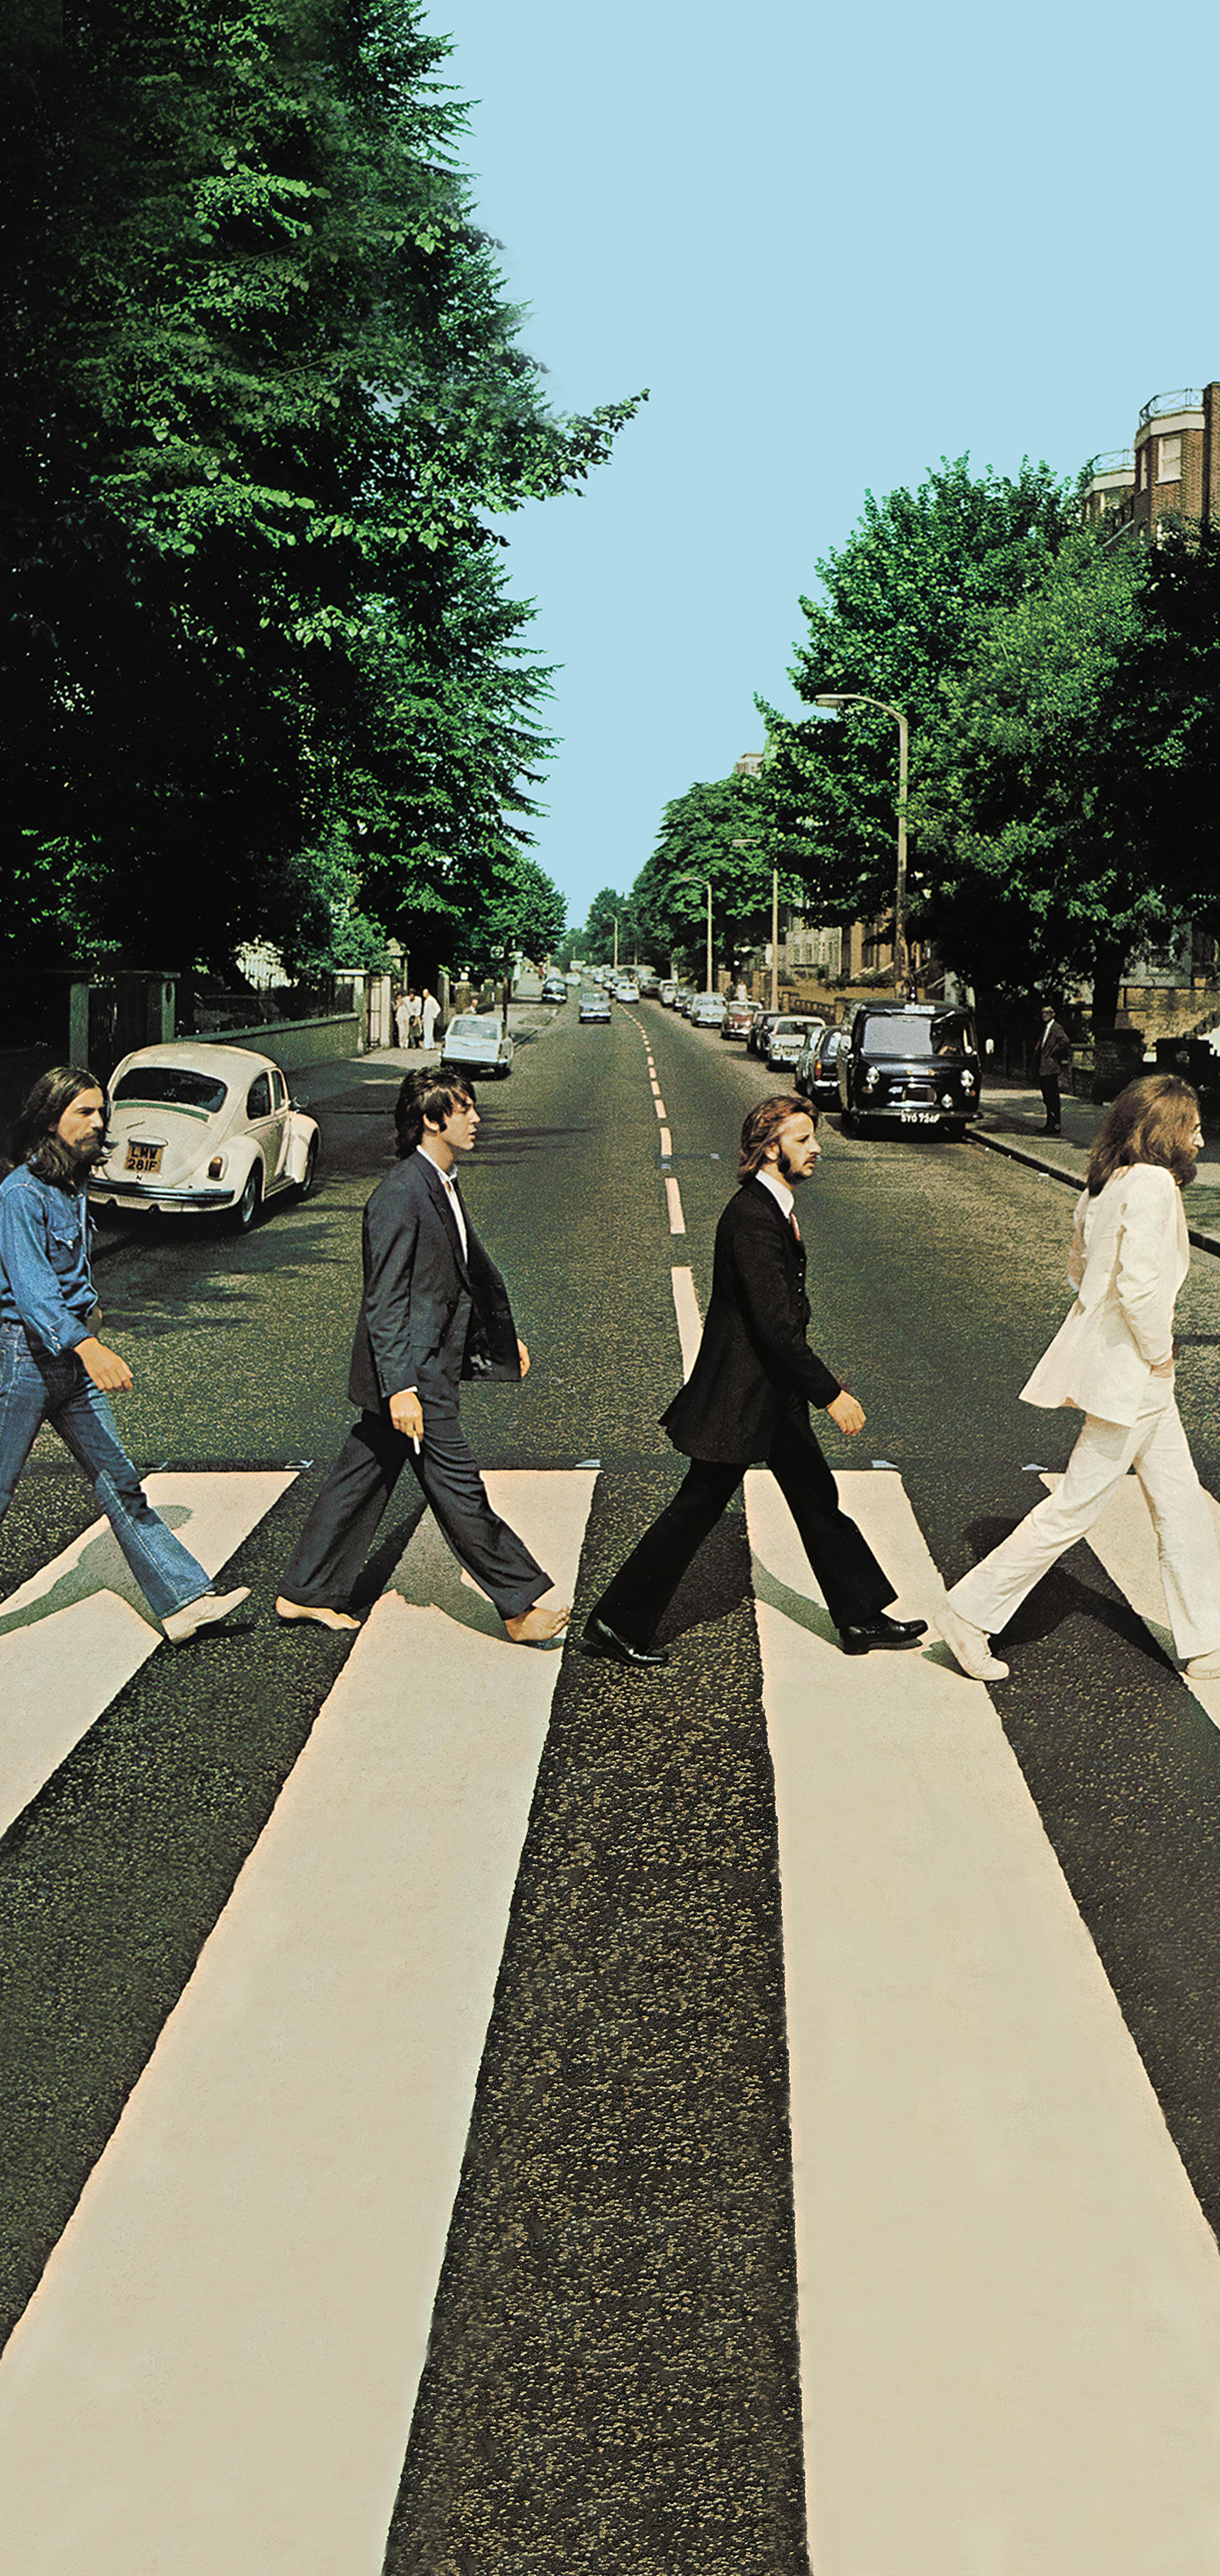 Made some hd abbey road phone wallpapers rbeatles